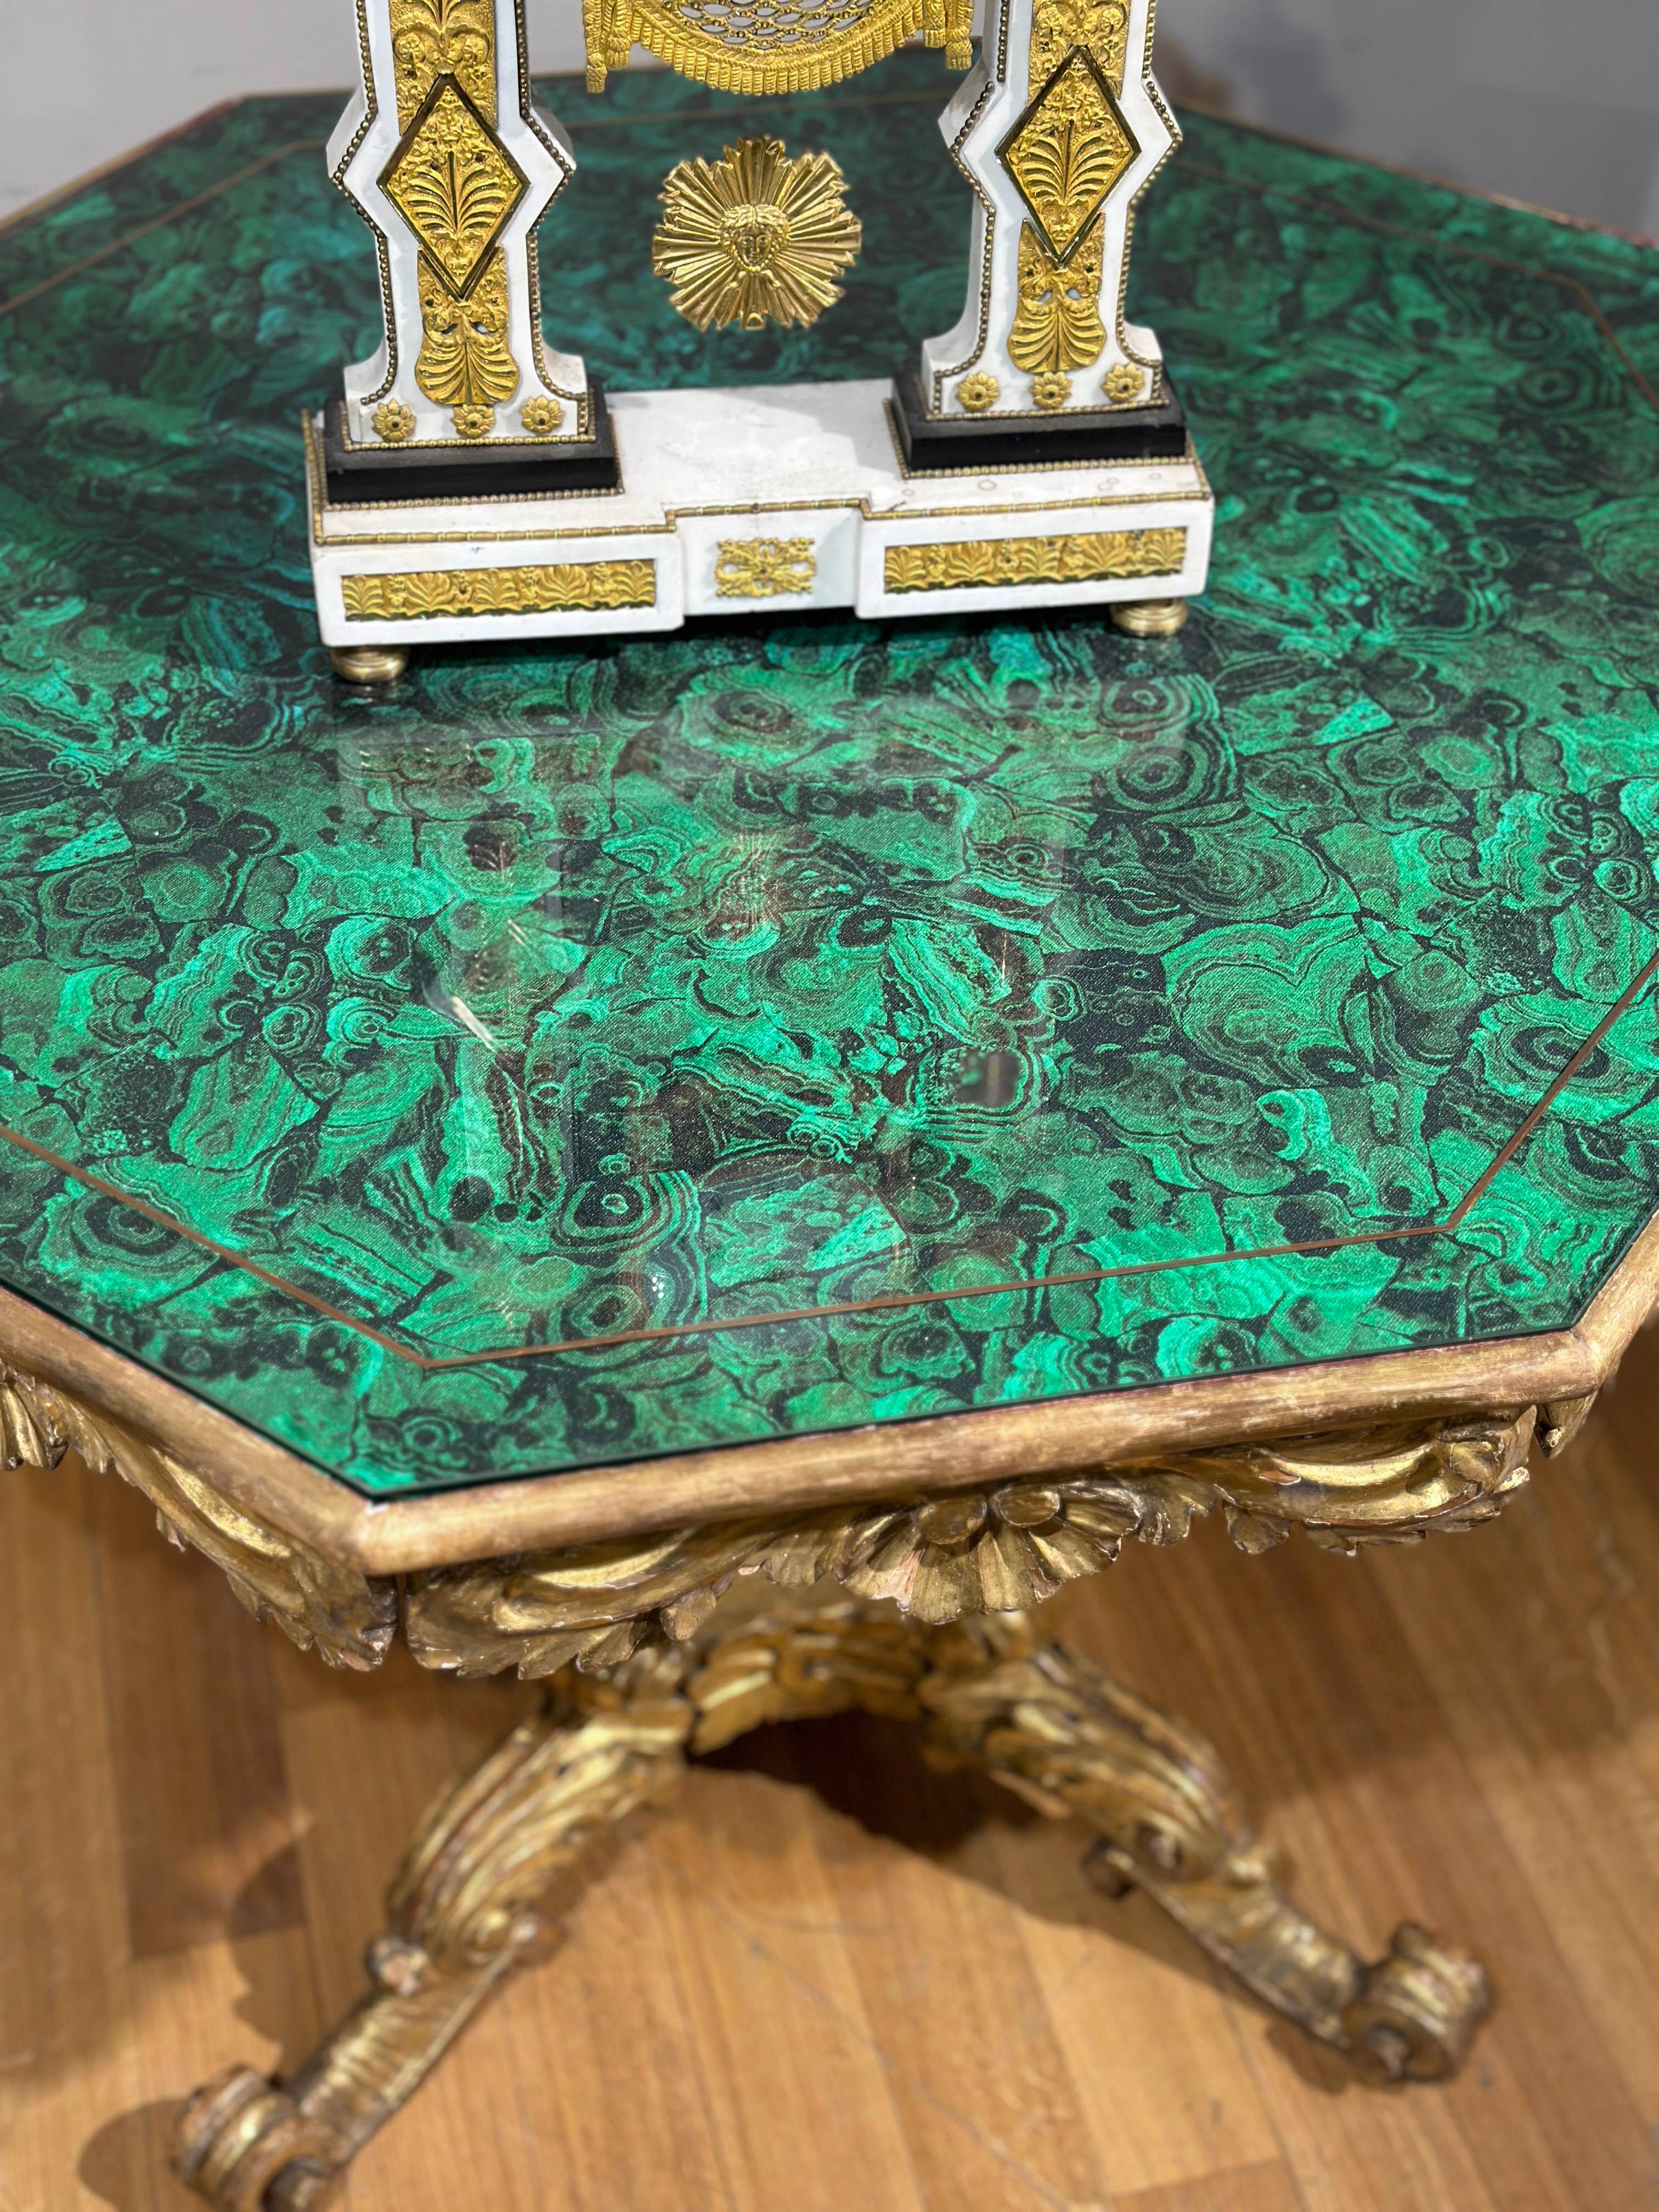 EARLY 19th CENTURY GILDED WOOD TABLE WITH SIMILAR MALACHITE FABRIC For Sale 5